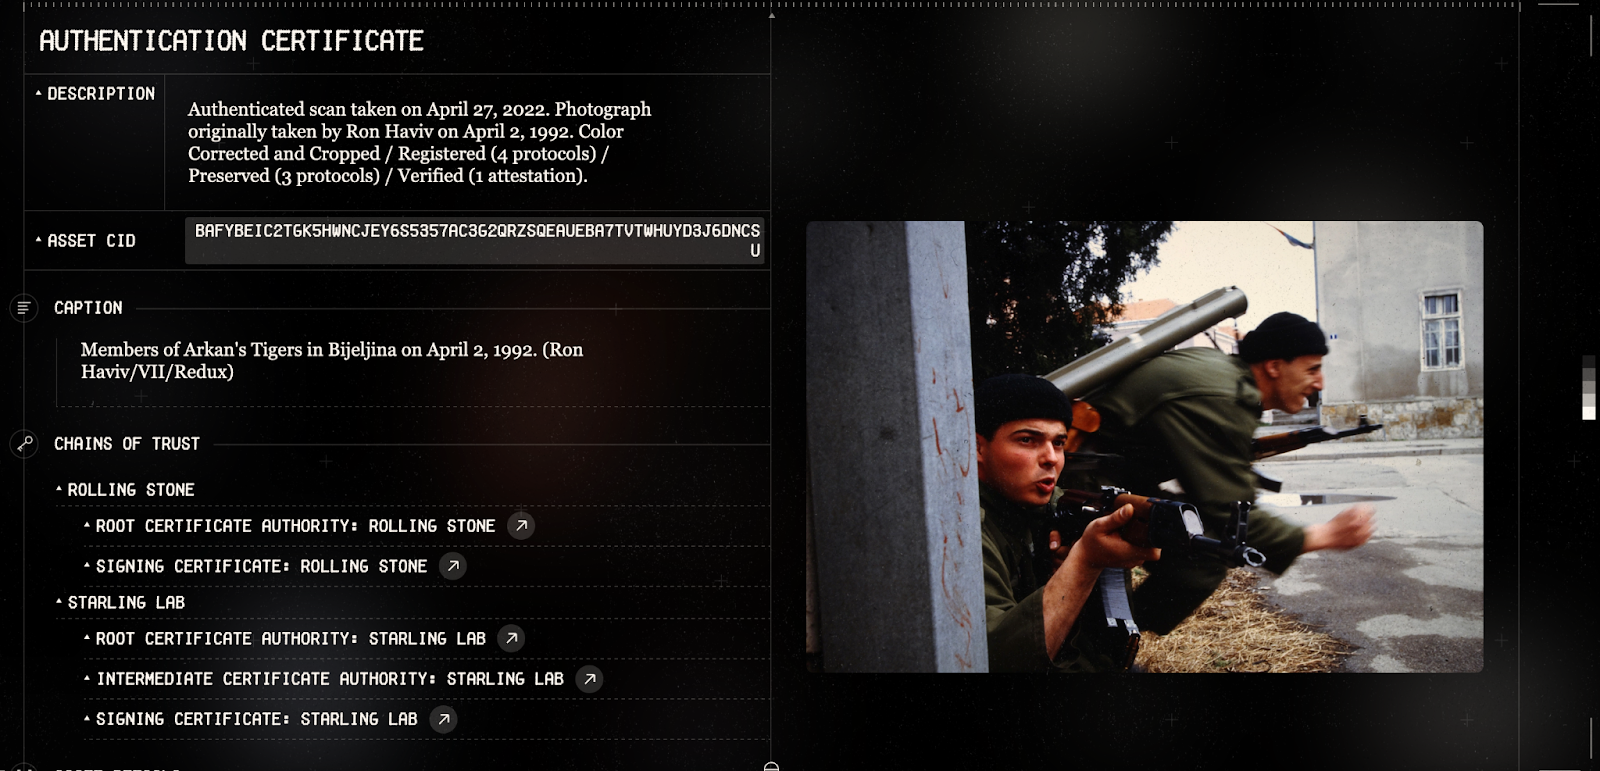 Screen cap from Rolling Stone magazine of soliders in the Bosnian War